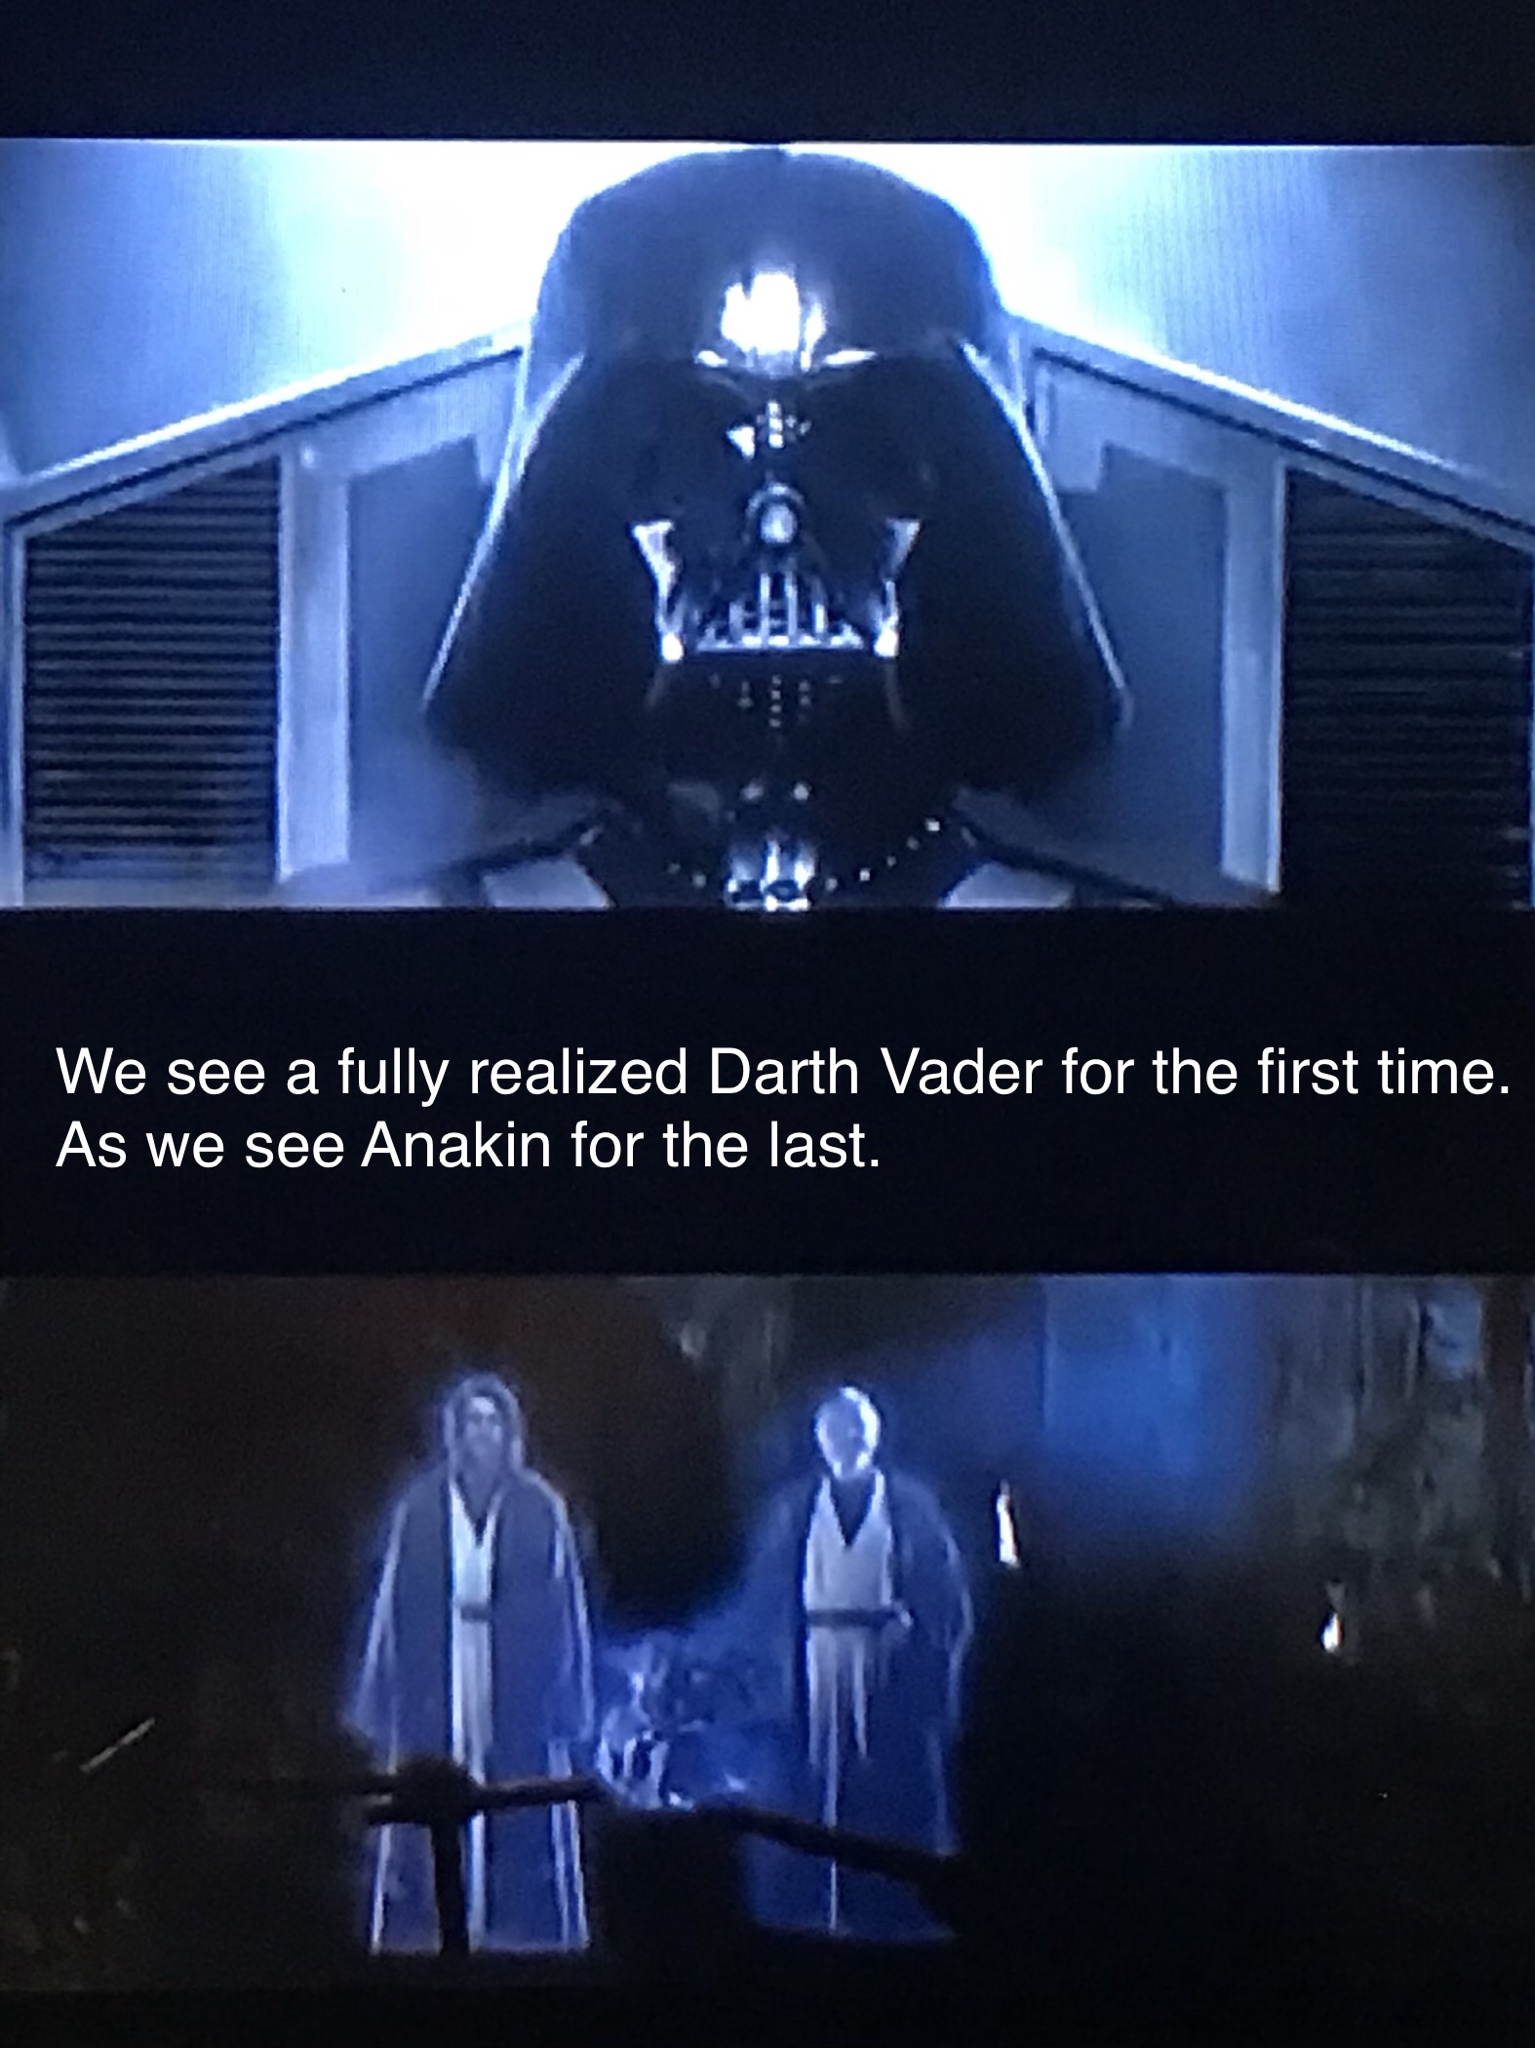 We see a fully realized Darth Vader for the first time, As we see Anakin for the last.